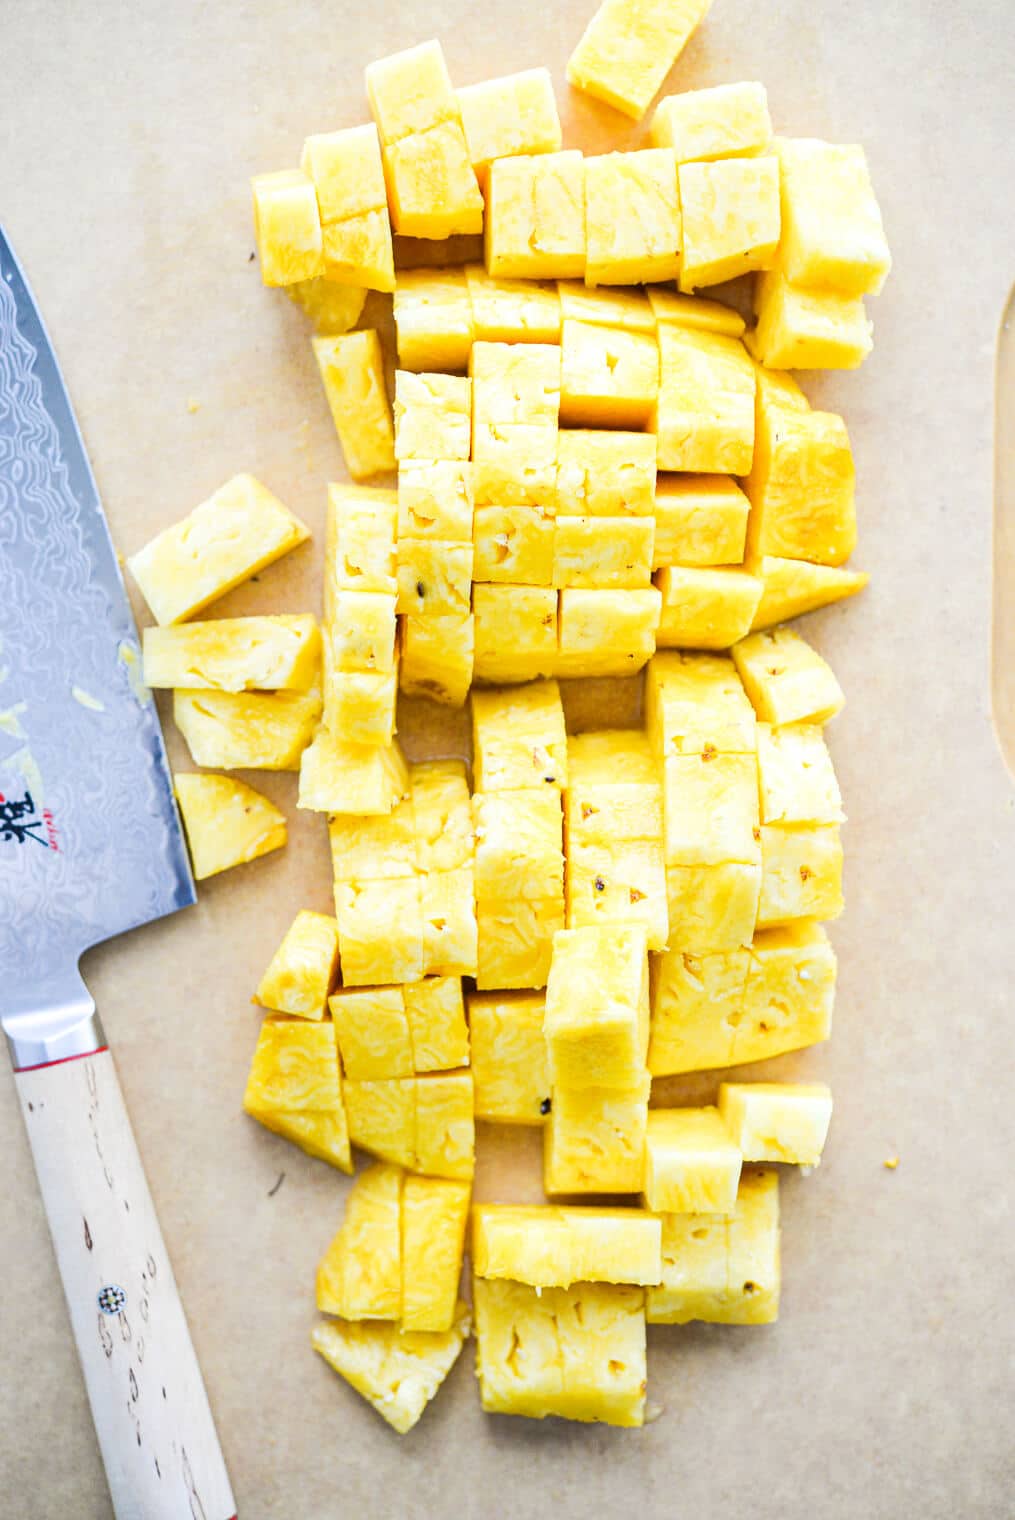 a large cutting board of cubed pineapple flesh sitting next to a large knife